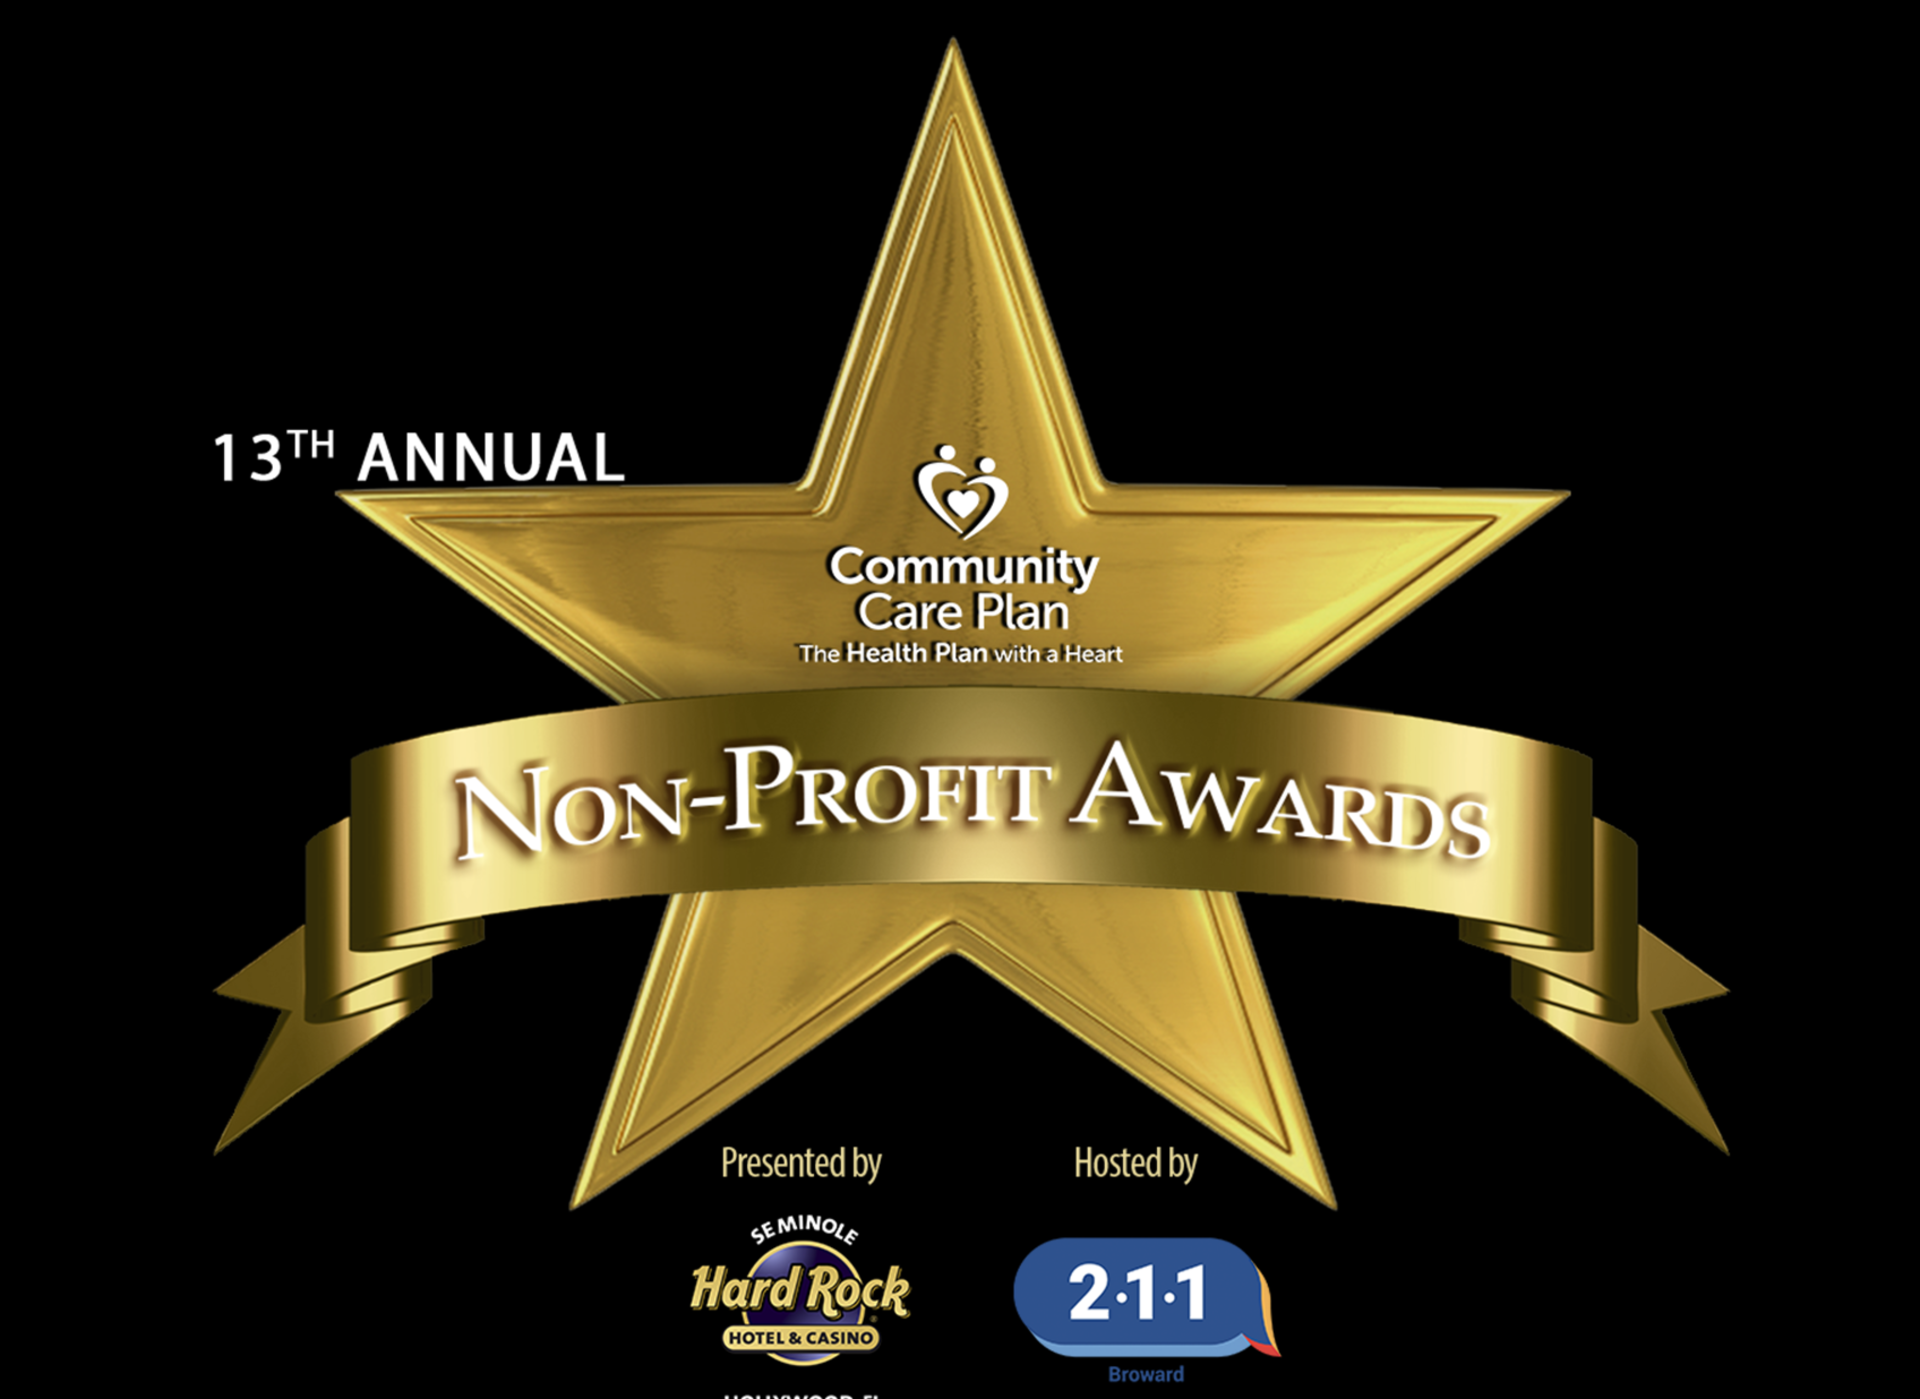  13th Annual Community Care Plan Non-Profit Awards Hosted by the Seminole Hard Rock Hotel & Casino